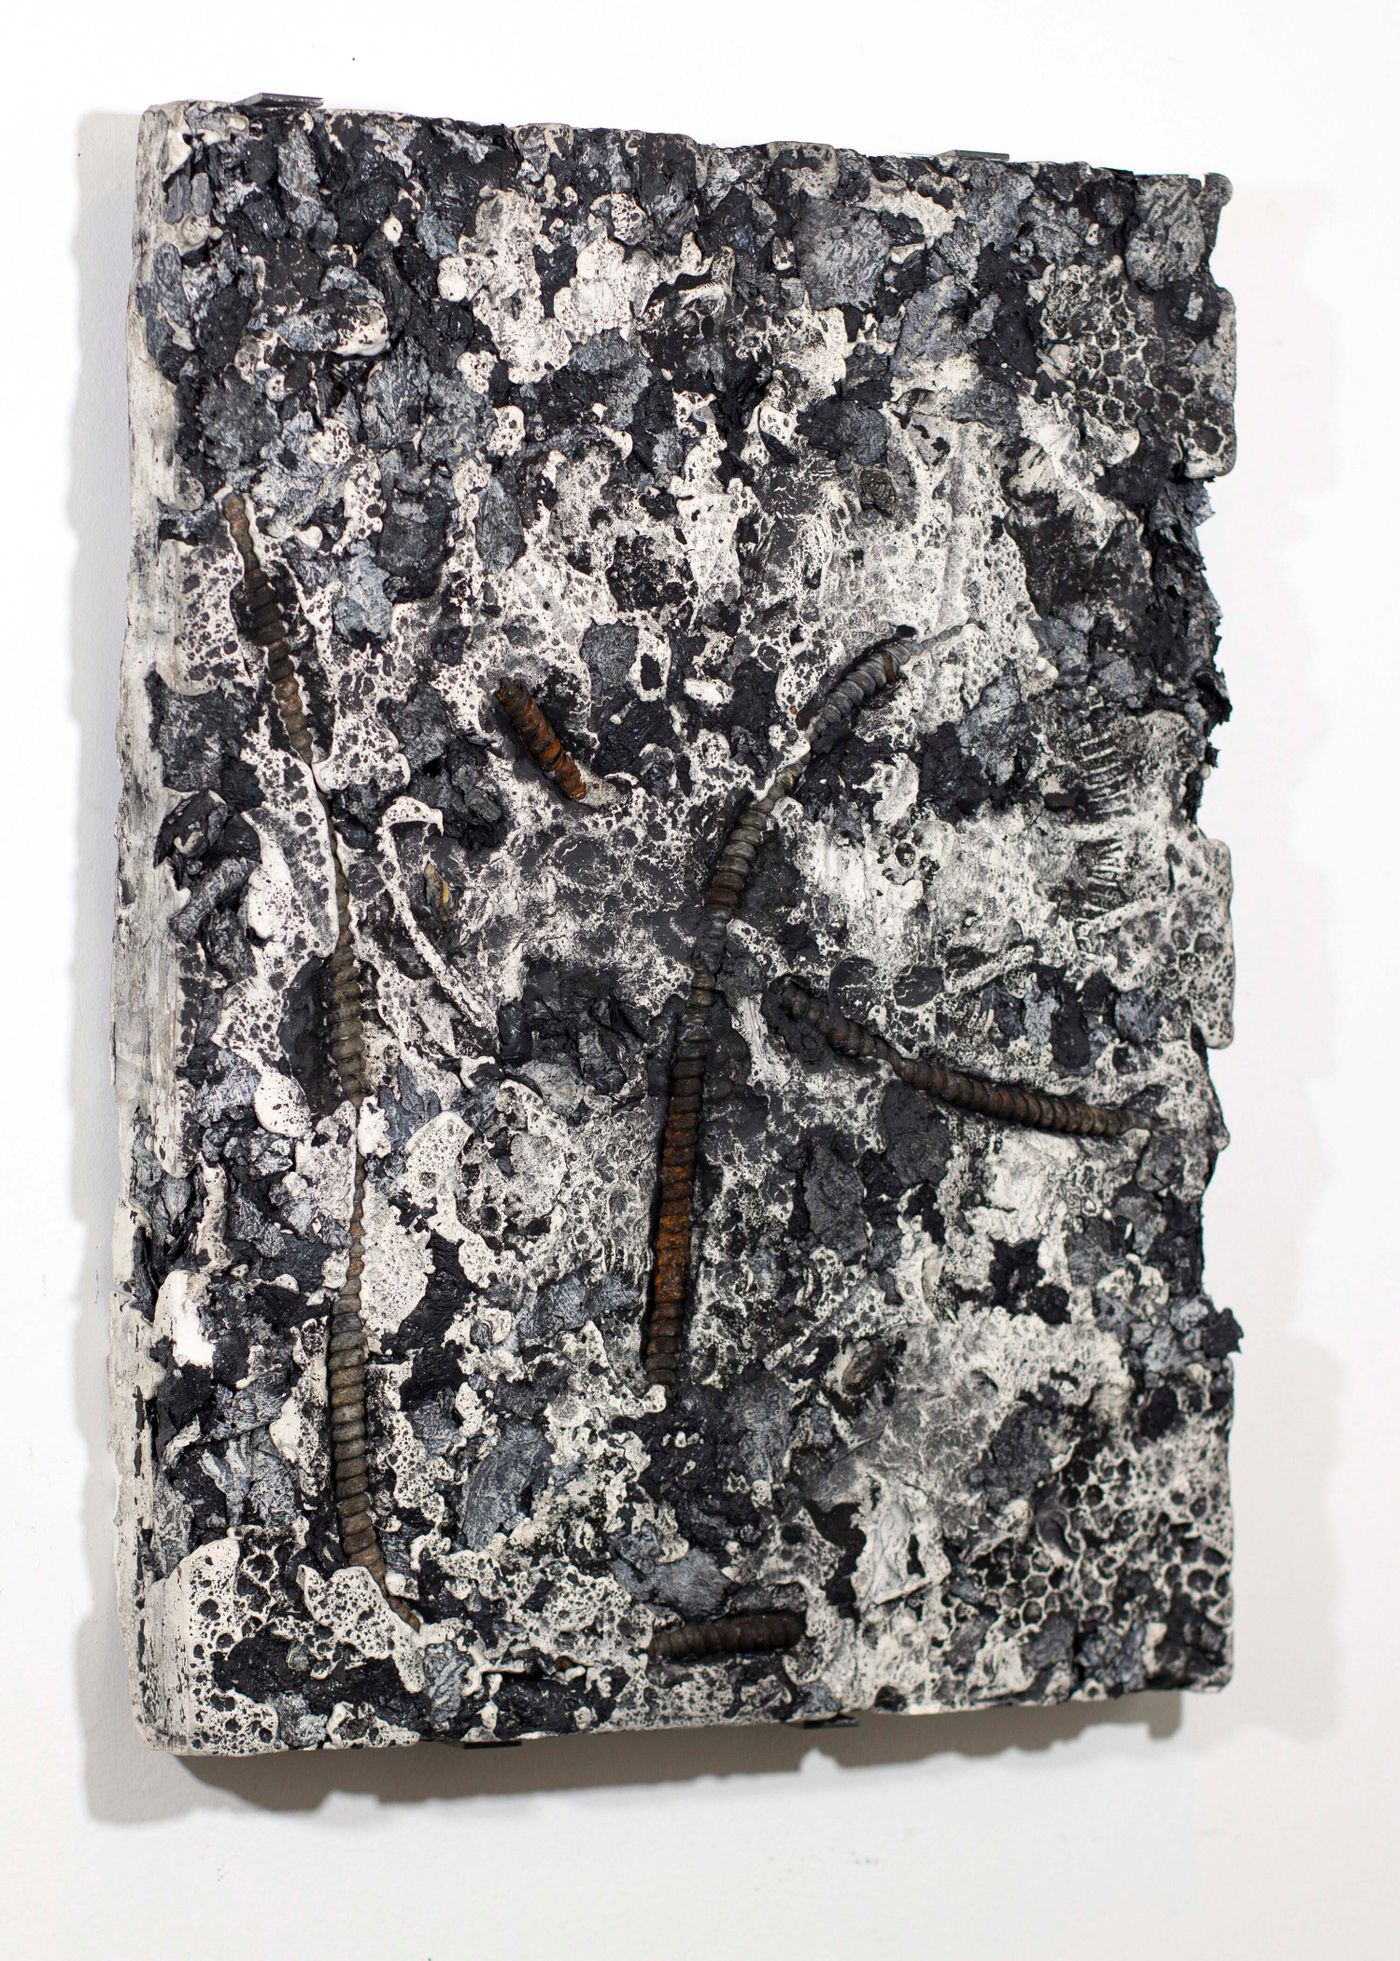 Fossil I, 2022. Oil paint fragments, clay, steel, shells, hadrosaur fossils and graphite dust casted into plaster; 24 x 18 in. Photo courtesy the artist.